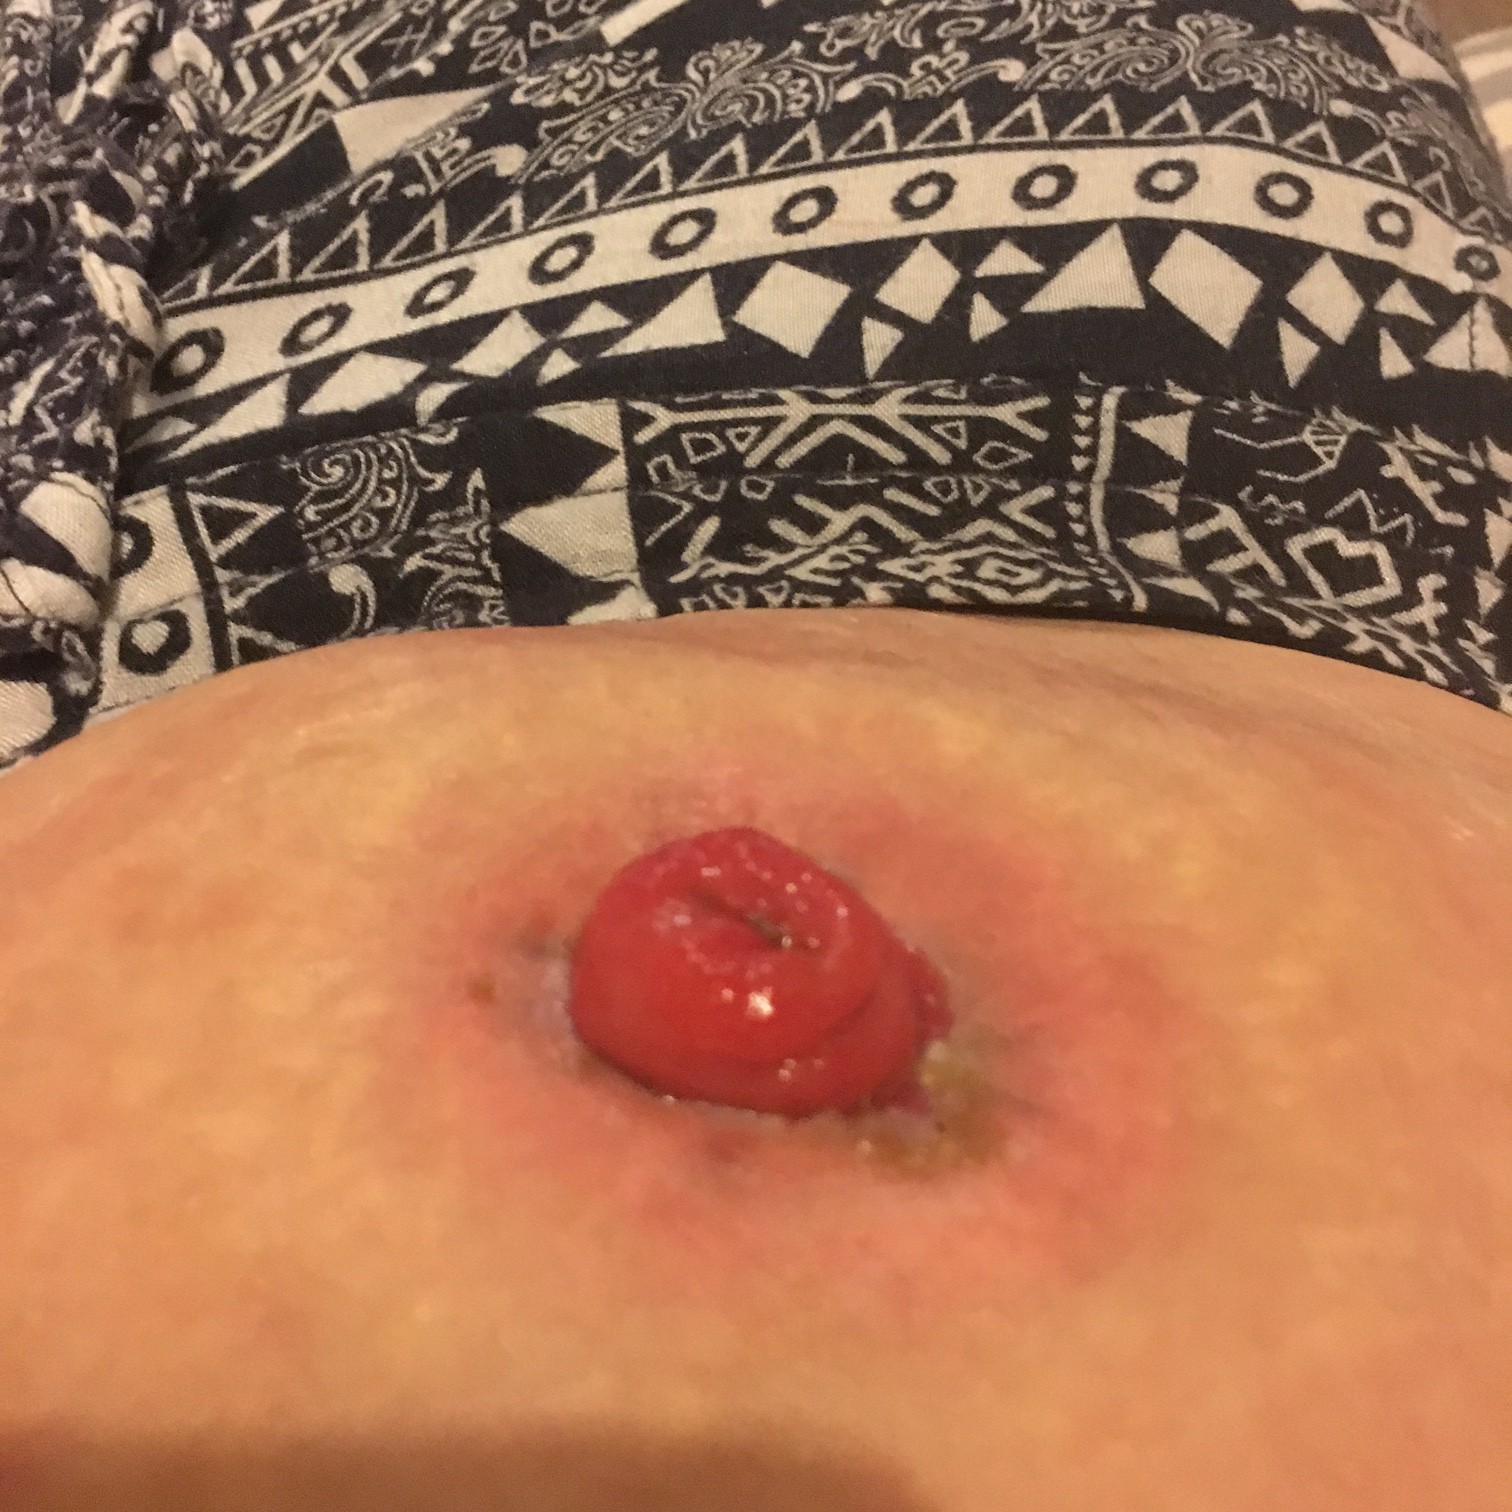 stoma problems my stoma has come away from the skin